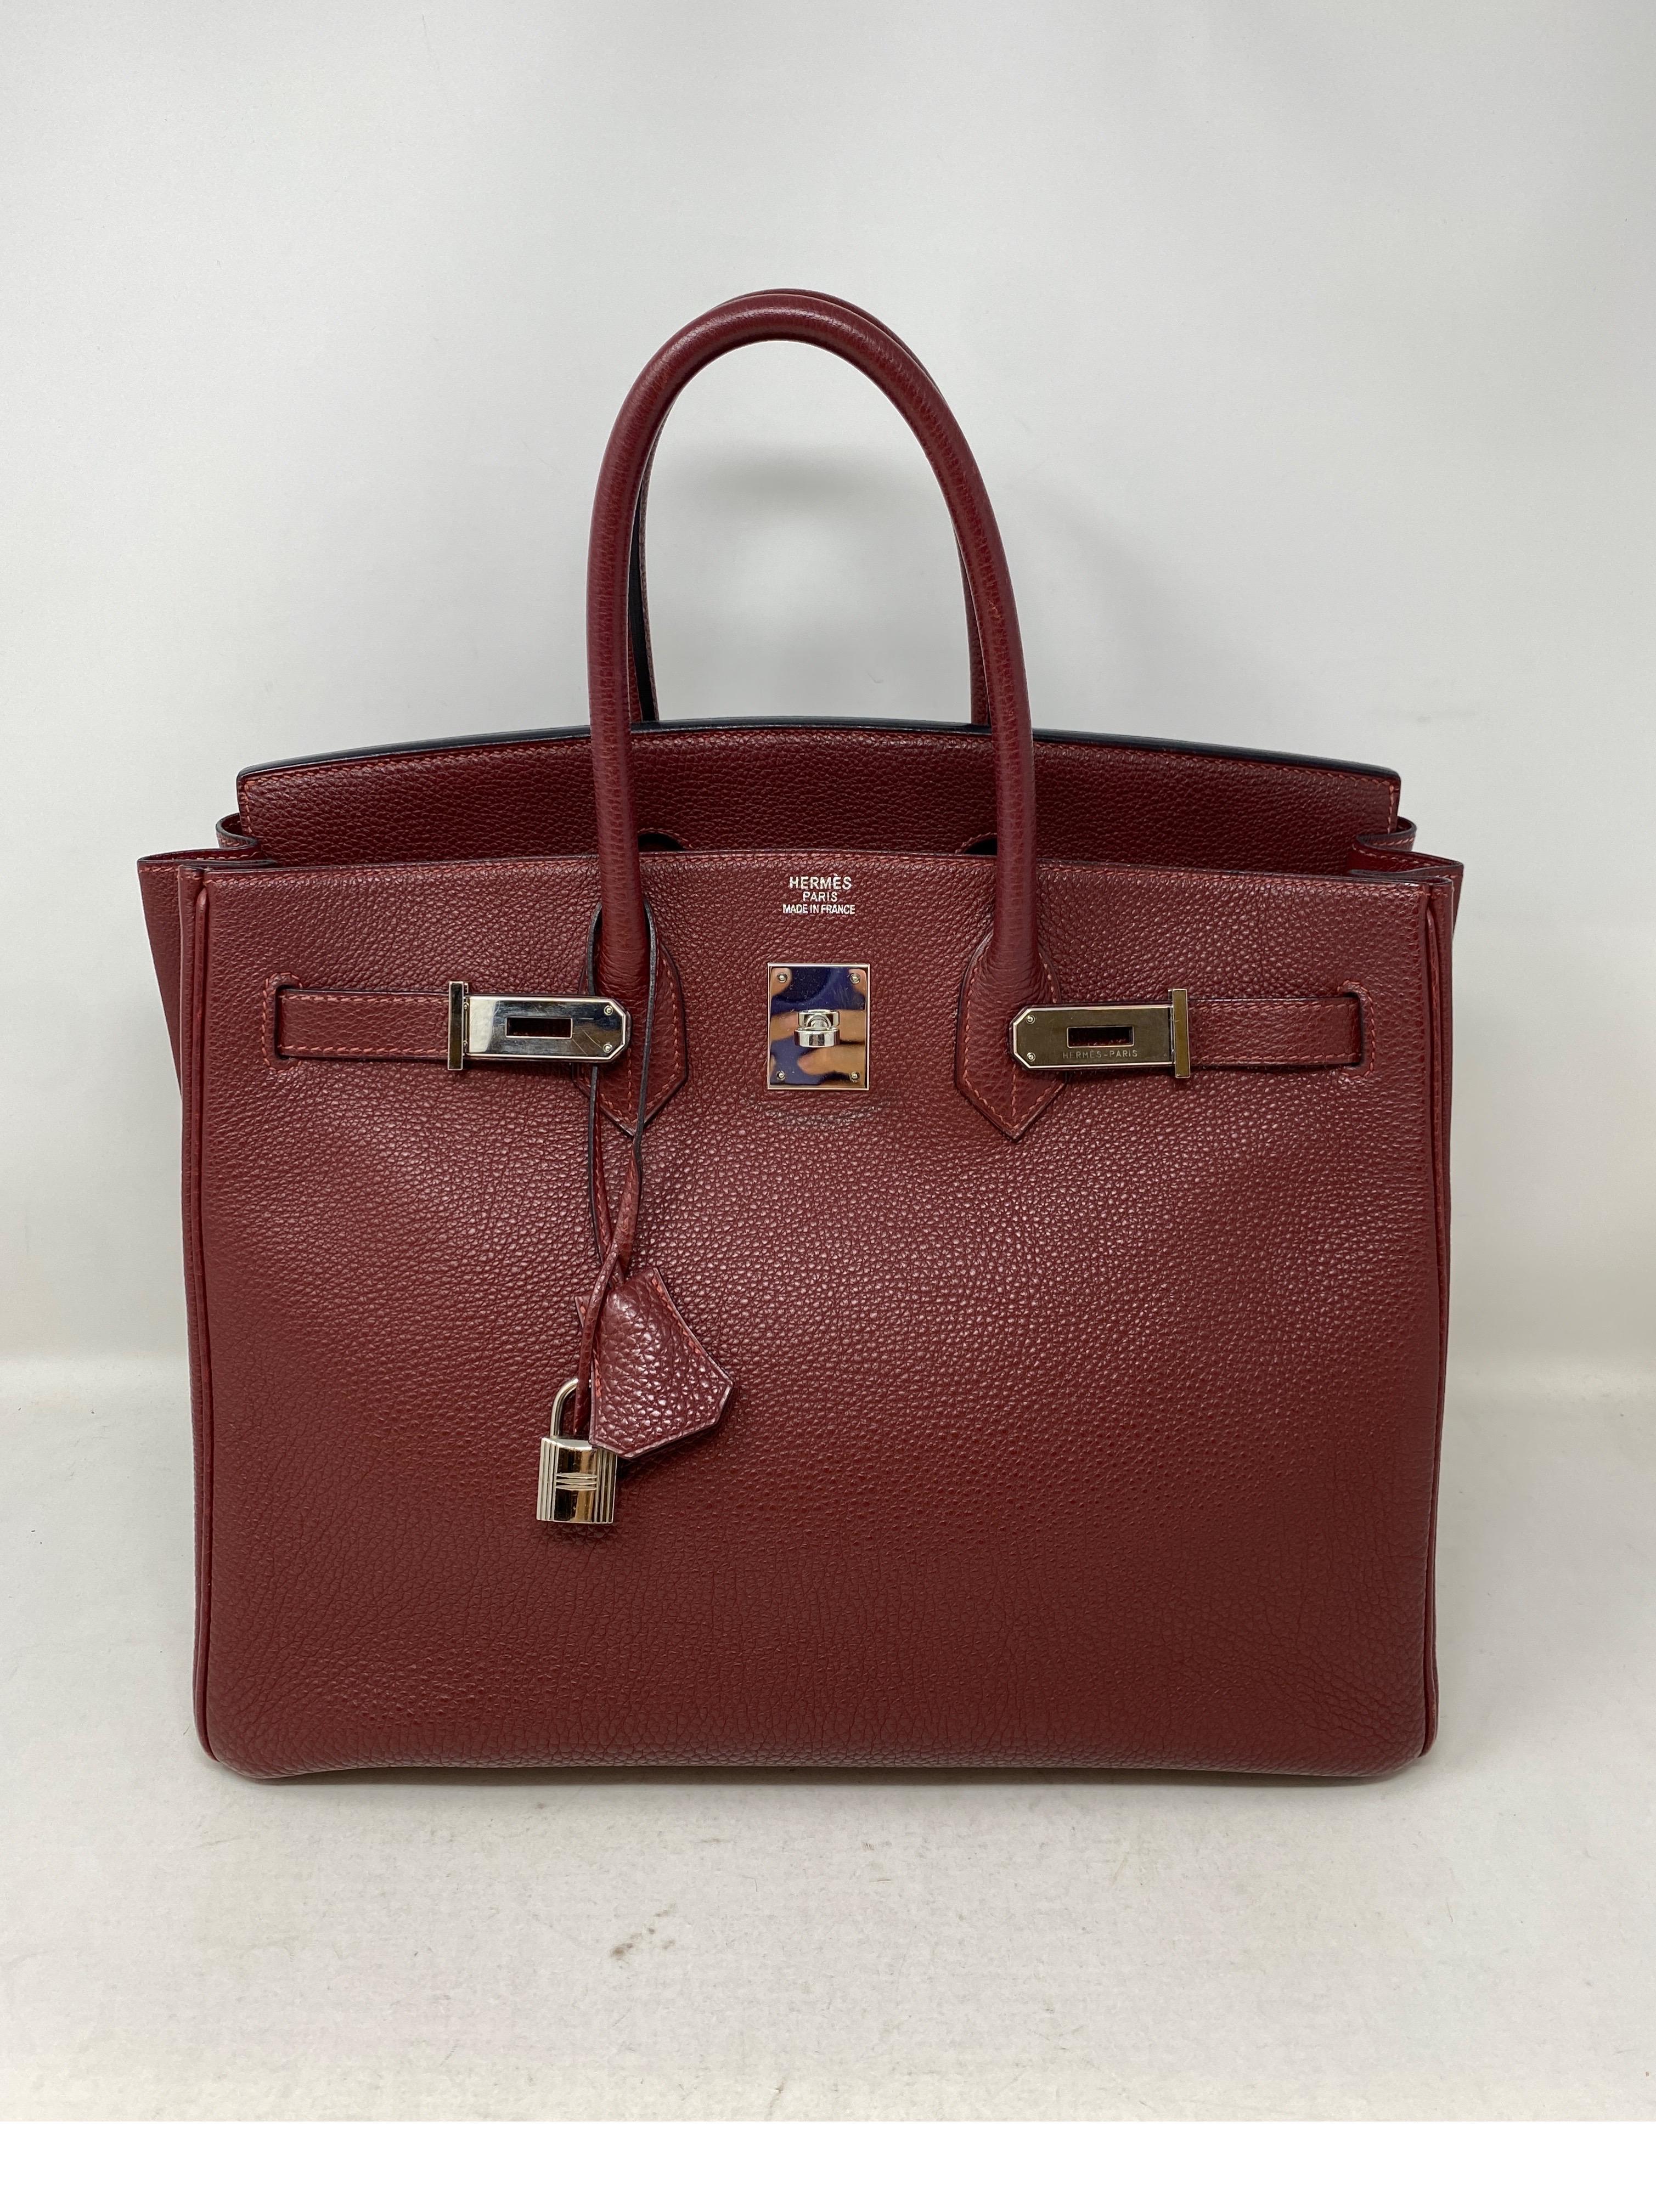 Hermes Rouge Birkin 35 Bag. Beautiful burgundy color with silver palladium hardware. Good condition. Nice neutral color. Includes clochette, lock, keys, and dust cover. Guaranteed authentic. 